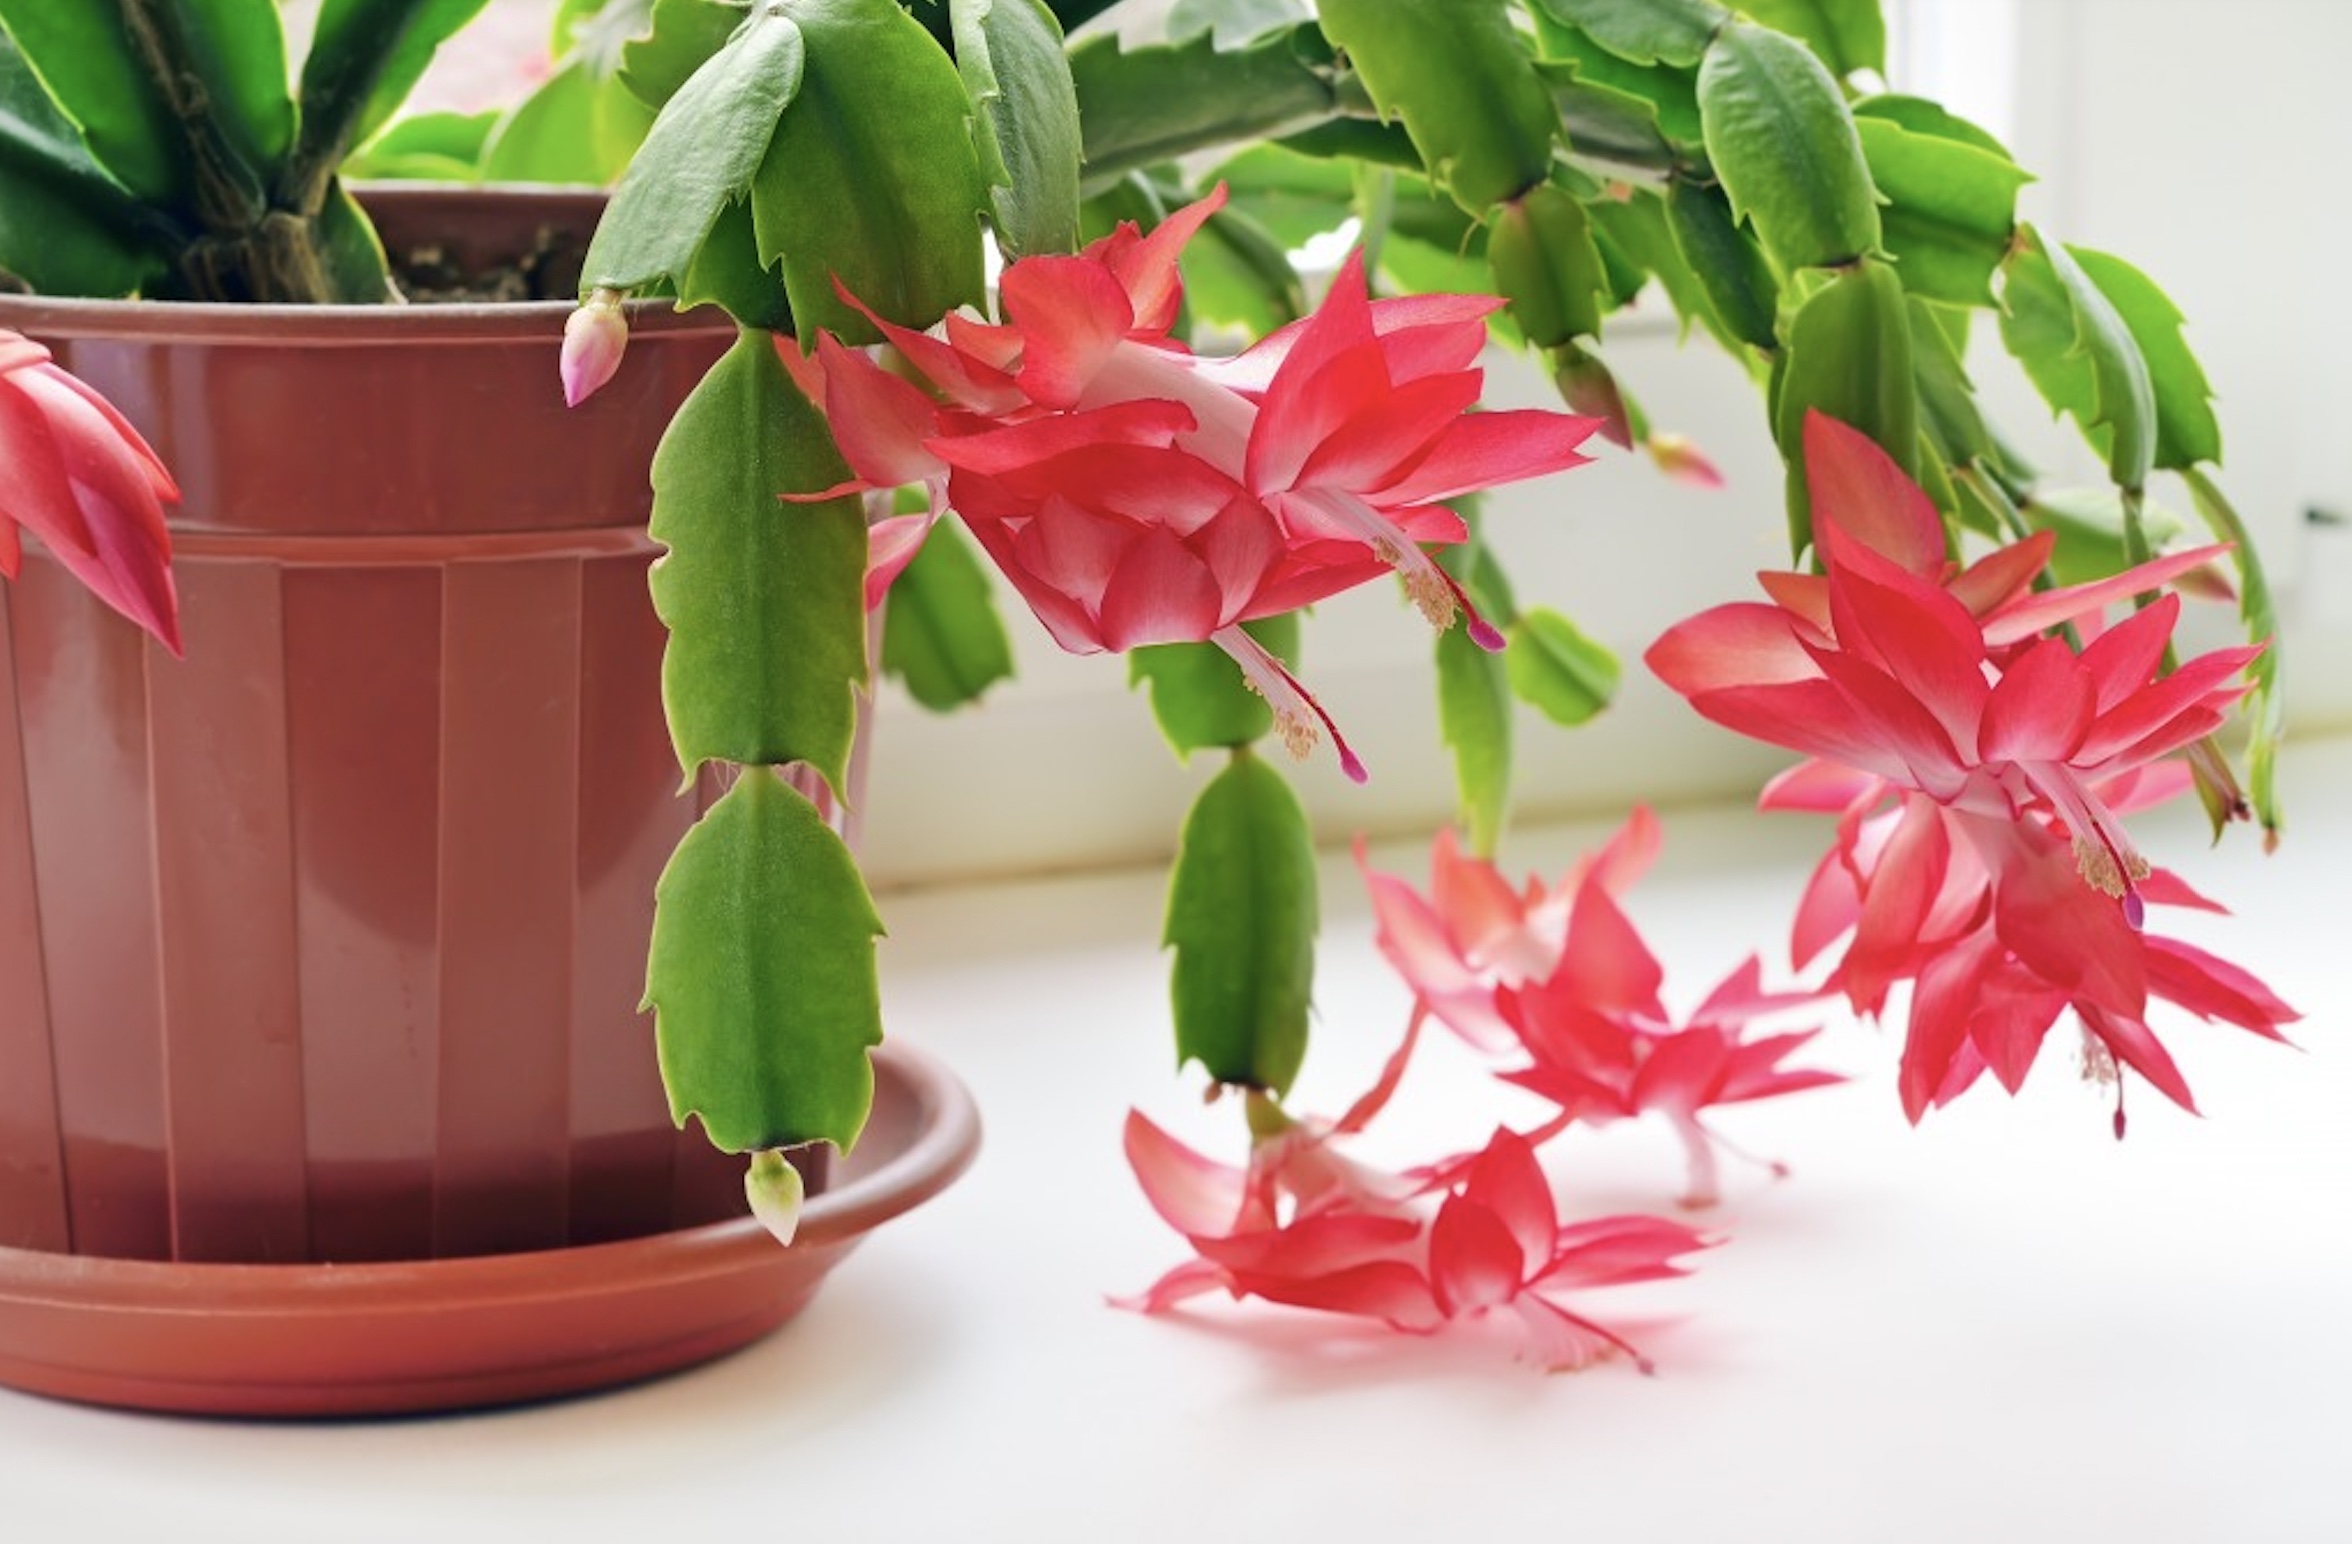 The Easter Cactus